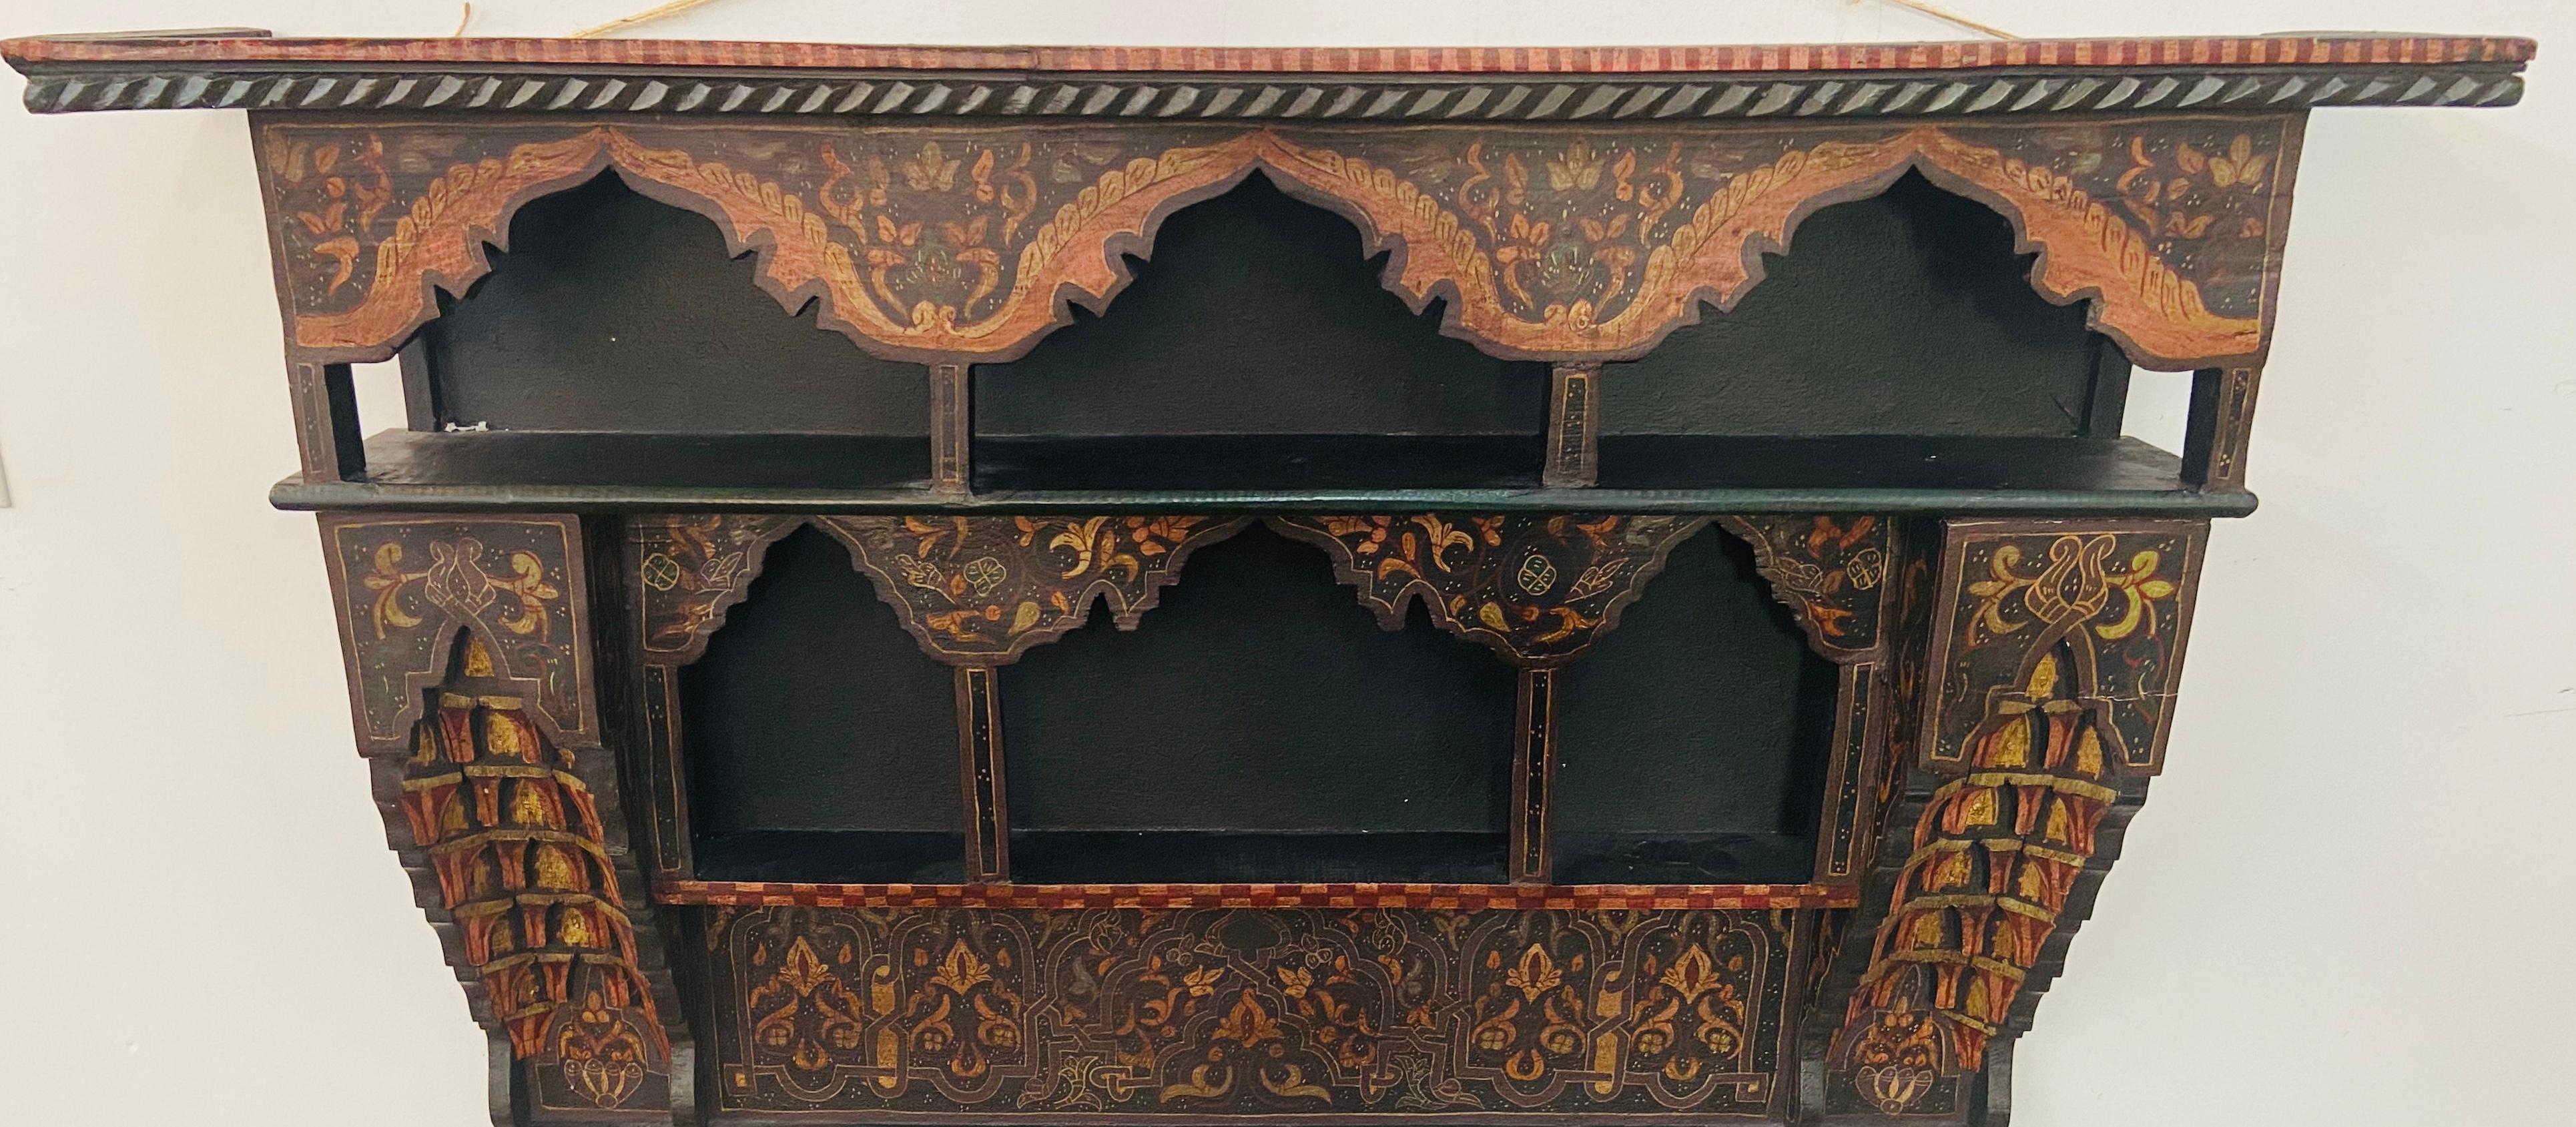 A mid-20th century Moroccan wall shelf or spice rack. The Moroccan shelf is beautifully handprinted and features centuries old Moorish design of geometrical patterns and arch. An exotic addition to your living room, dining room or kitchen walls.